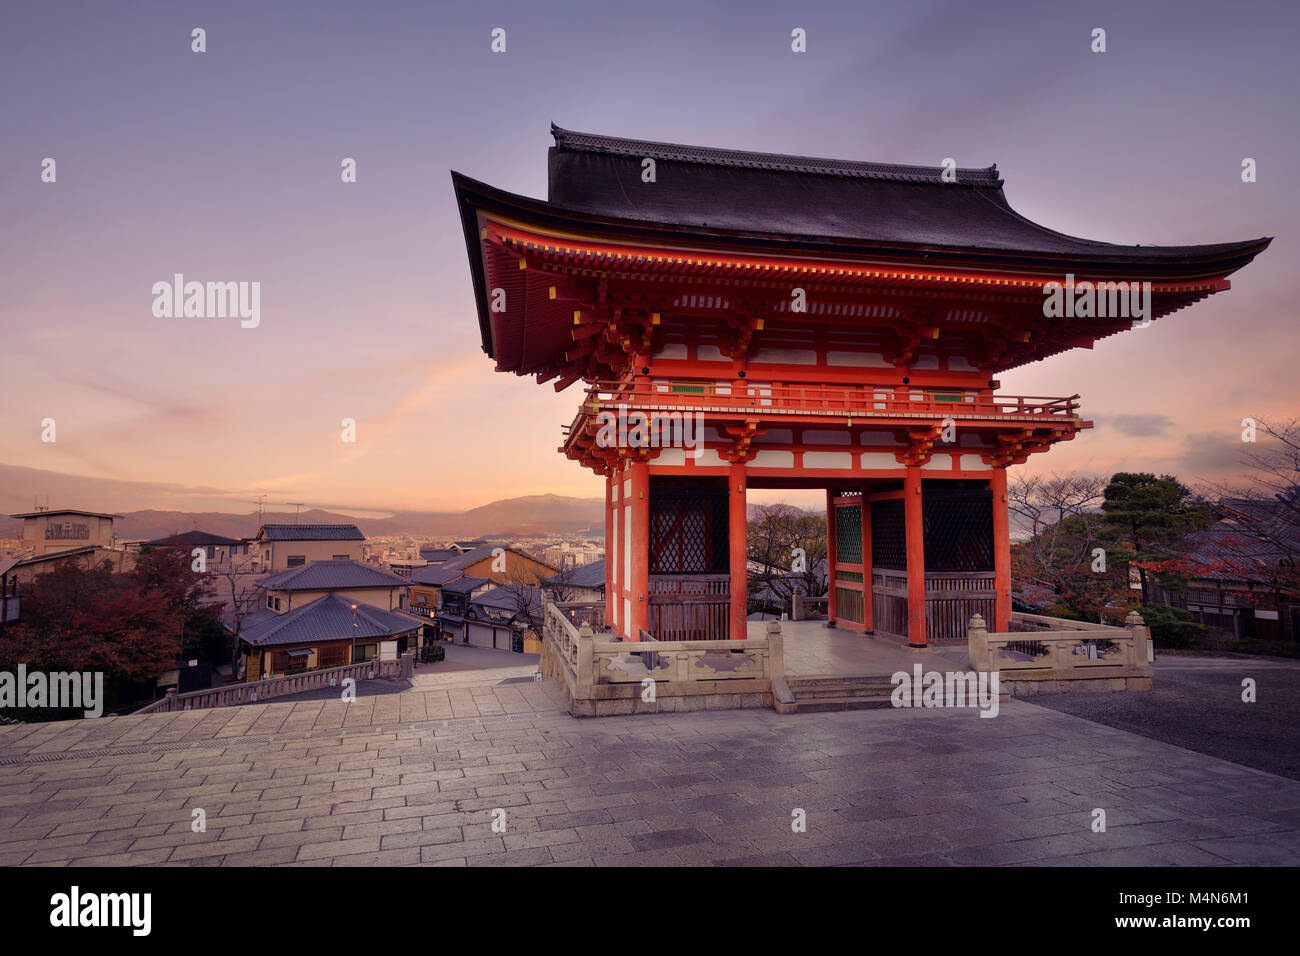 Nio-mon gate of Kiyomizu-dera Buddhist temple in a sunrise morning scenery. Two-storied Romon gate with Kyoto city landscape in the background. Higash Stock Photo